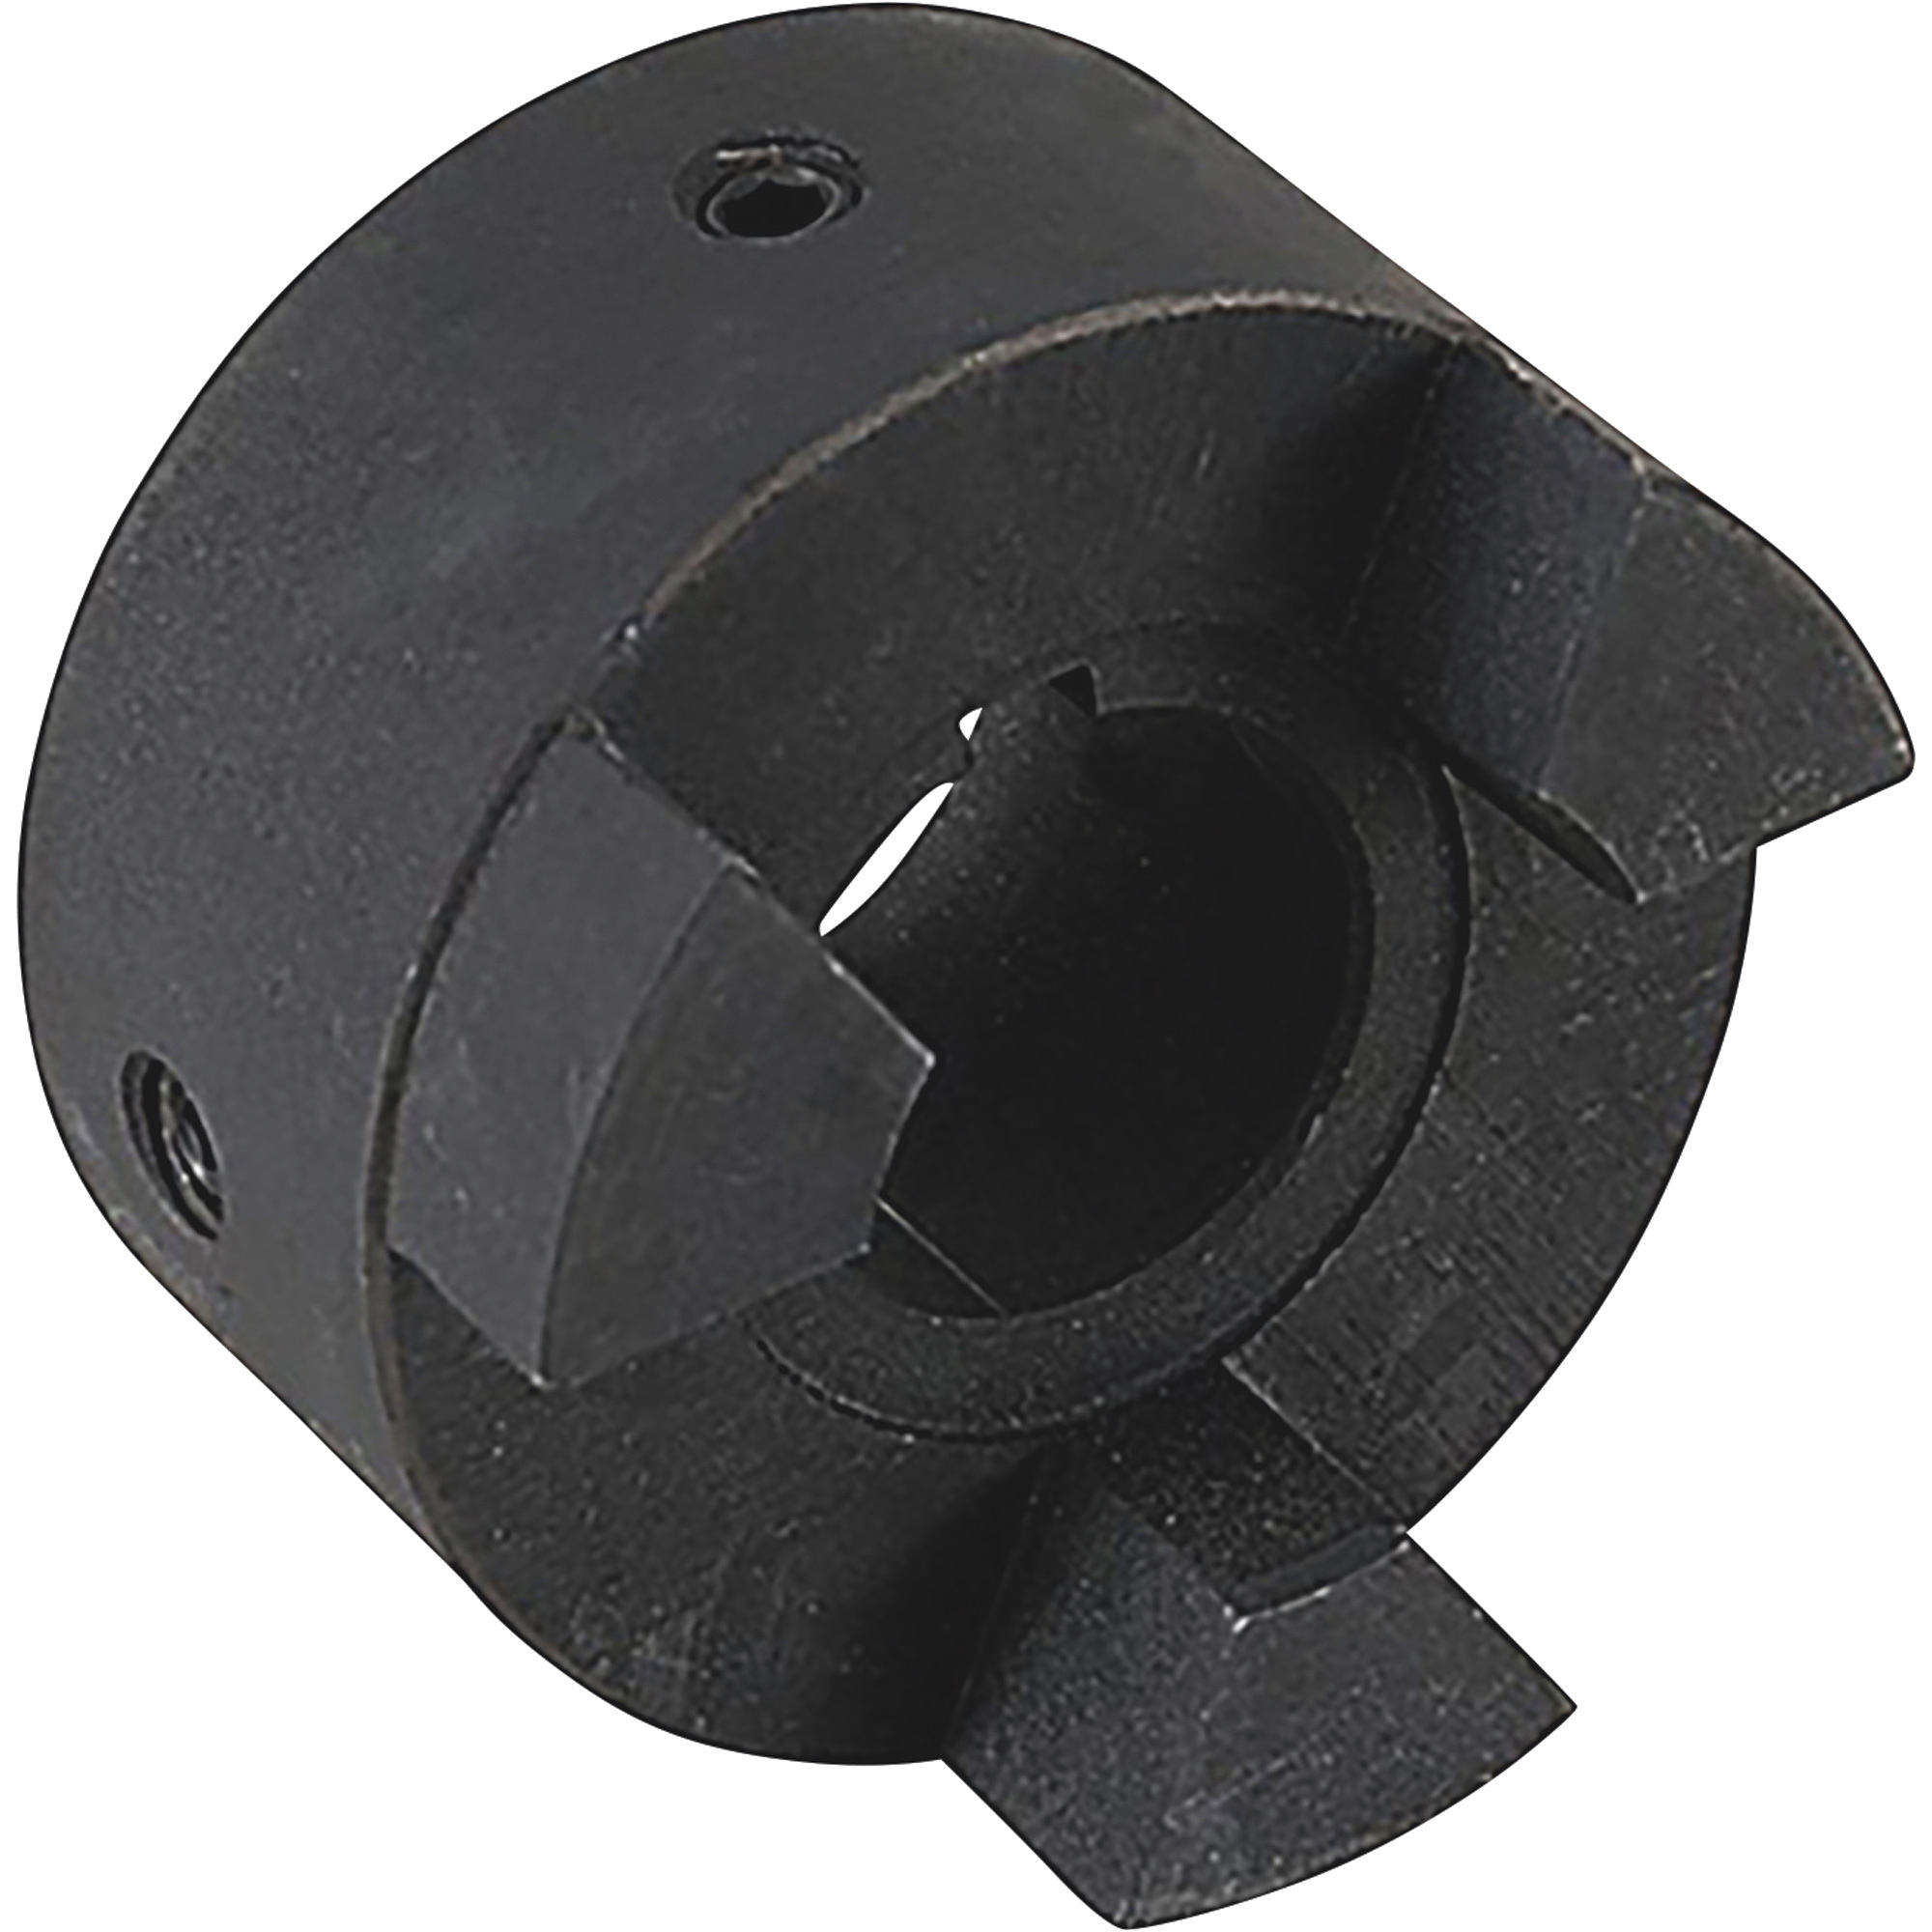 Concentric Standard Coupling, 9/16Inch Size, Model C-LO95-9/16